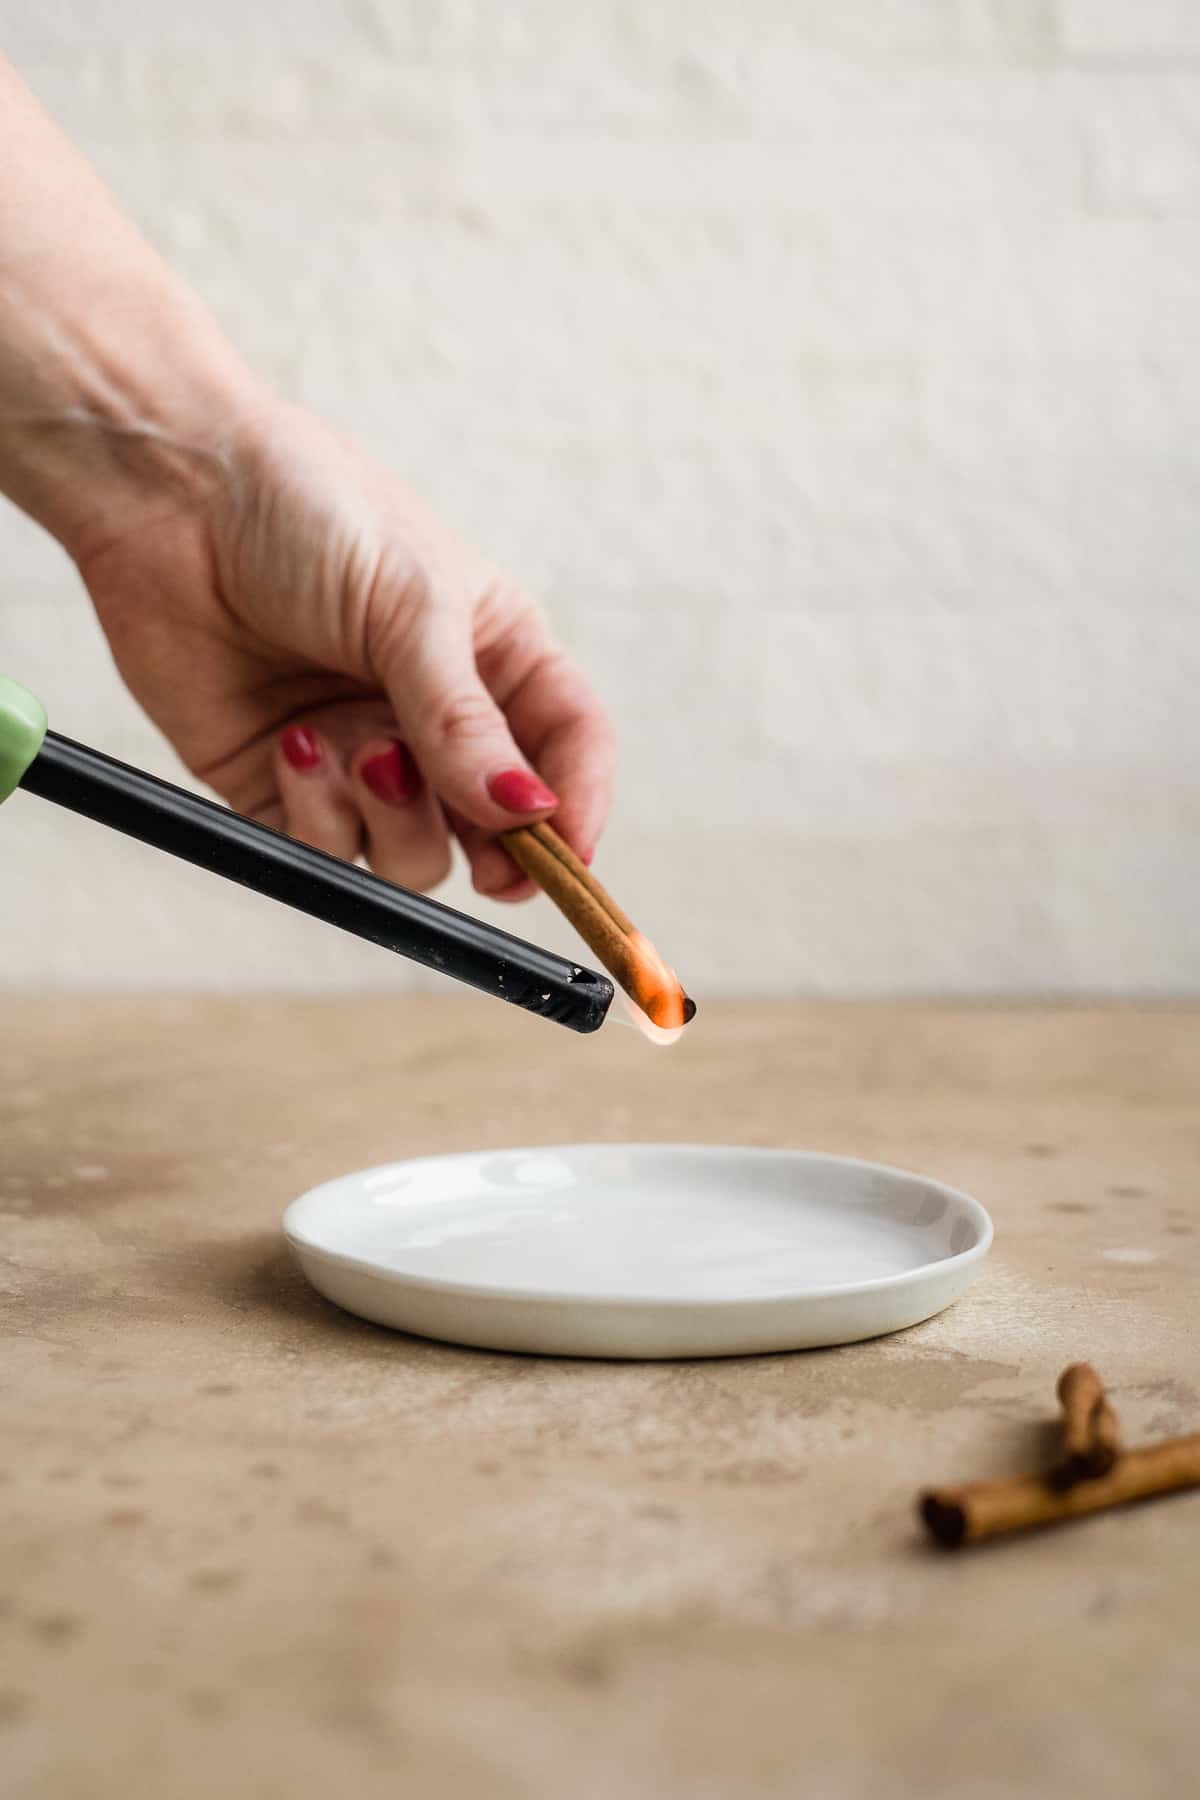 Person lighting a cinnamon stick on fire over a white plate.